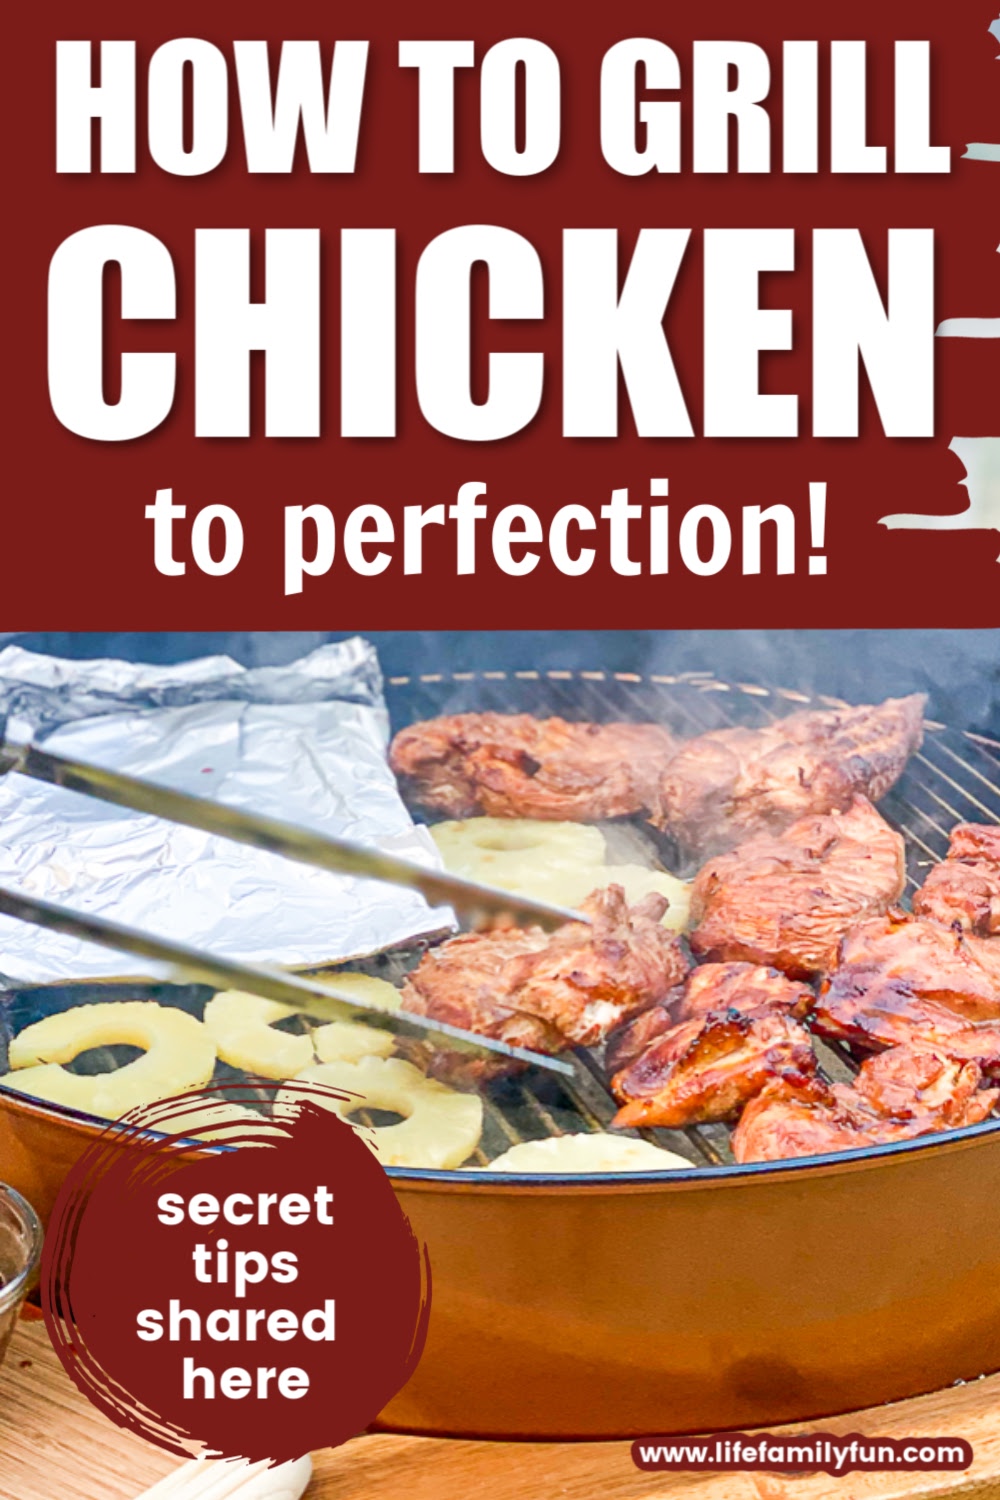 Grill Chicken Perfectly - Step by Step